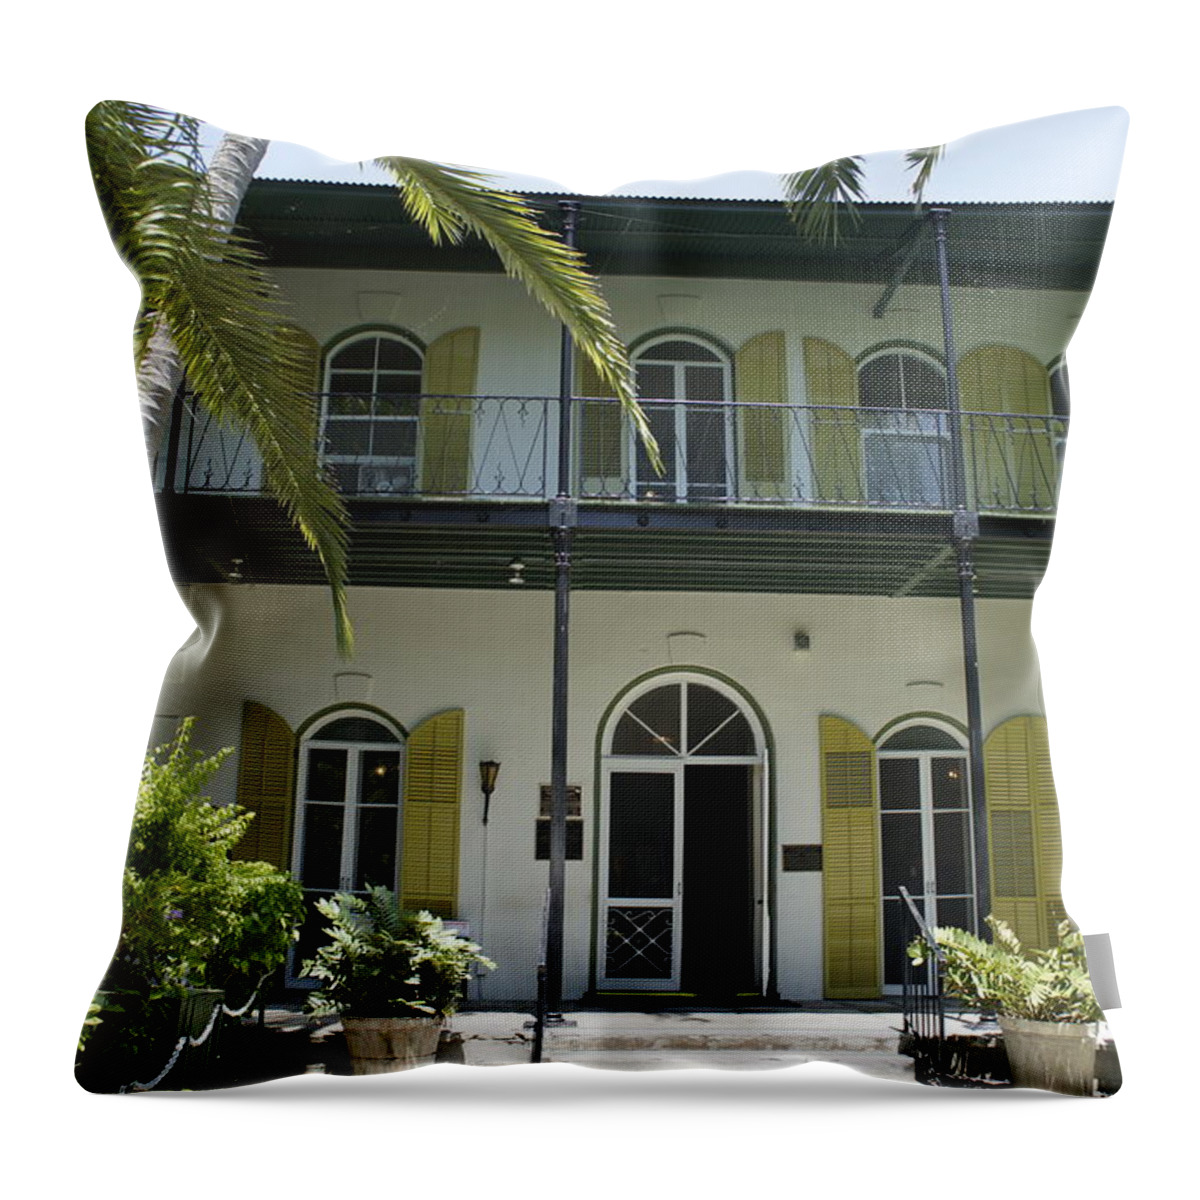 Ernest Hemingway's House Throw Pillow featuring the photograph Hemingway's Hideaway by Laurie Perry